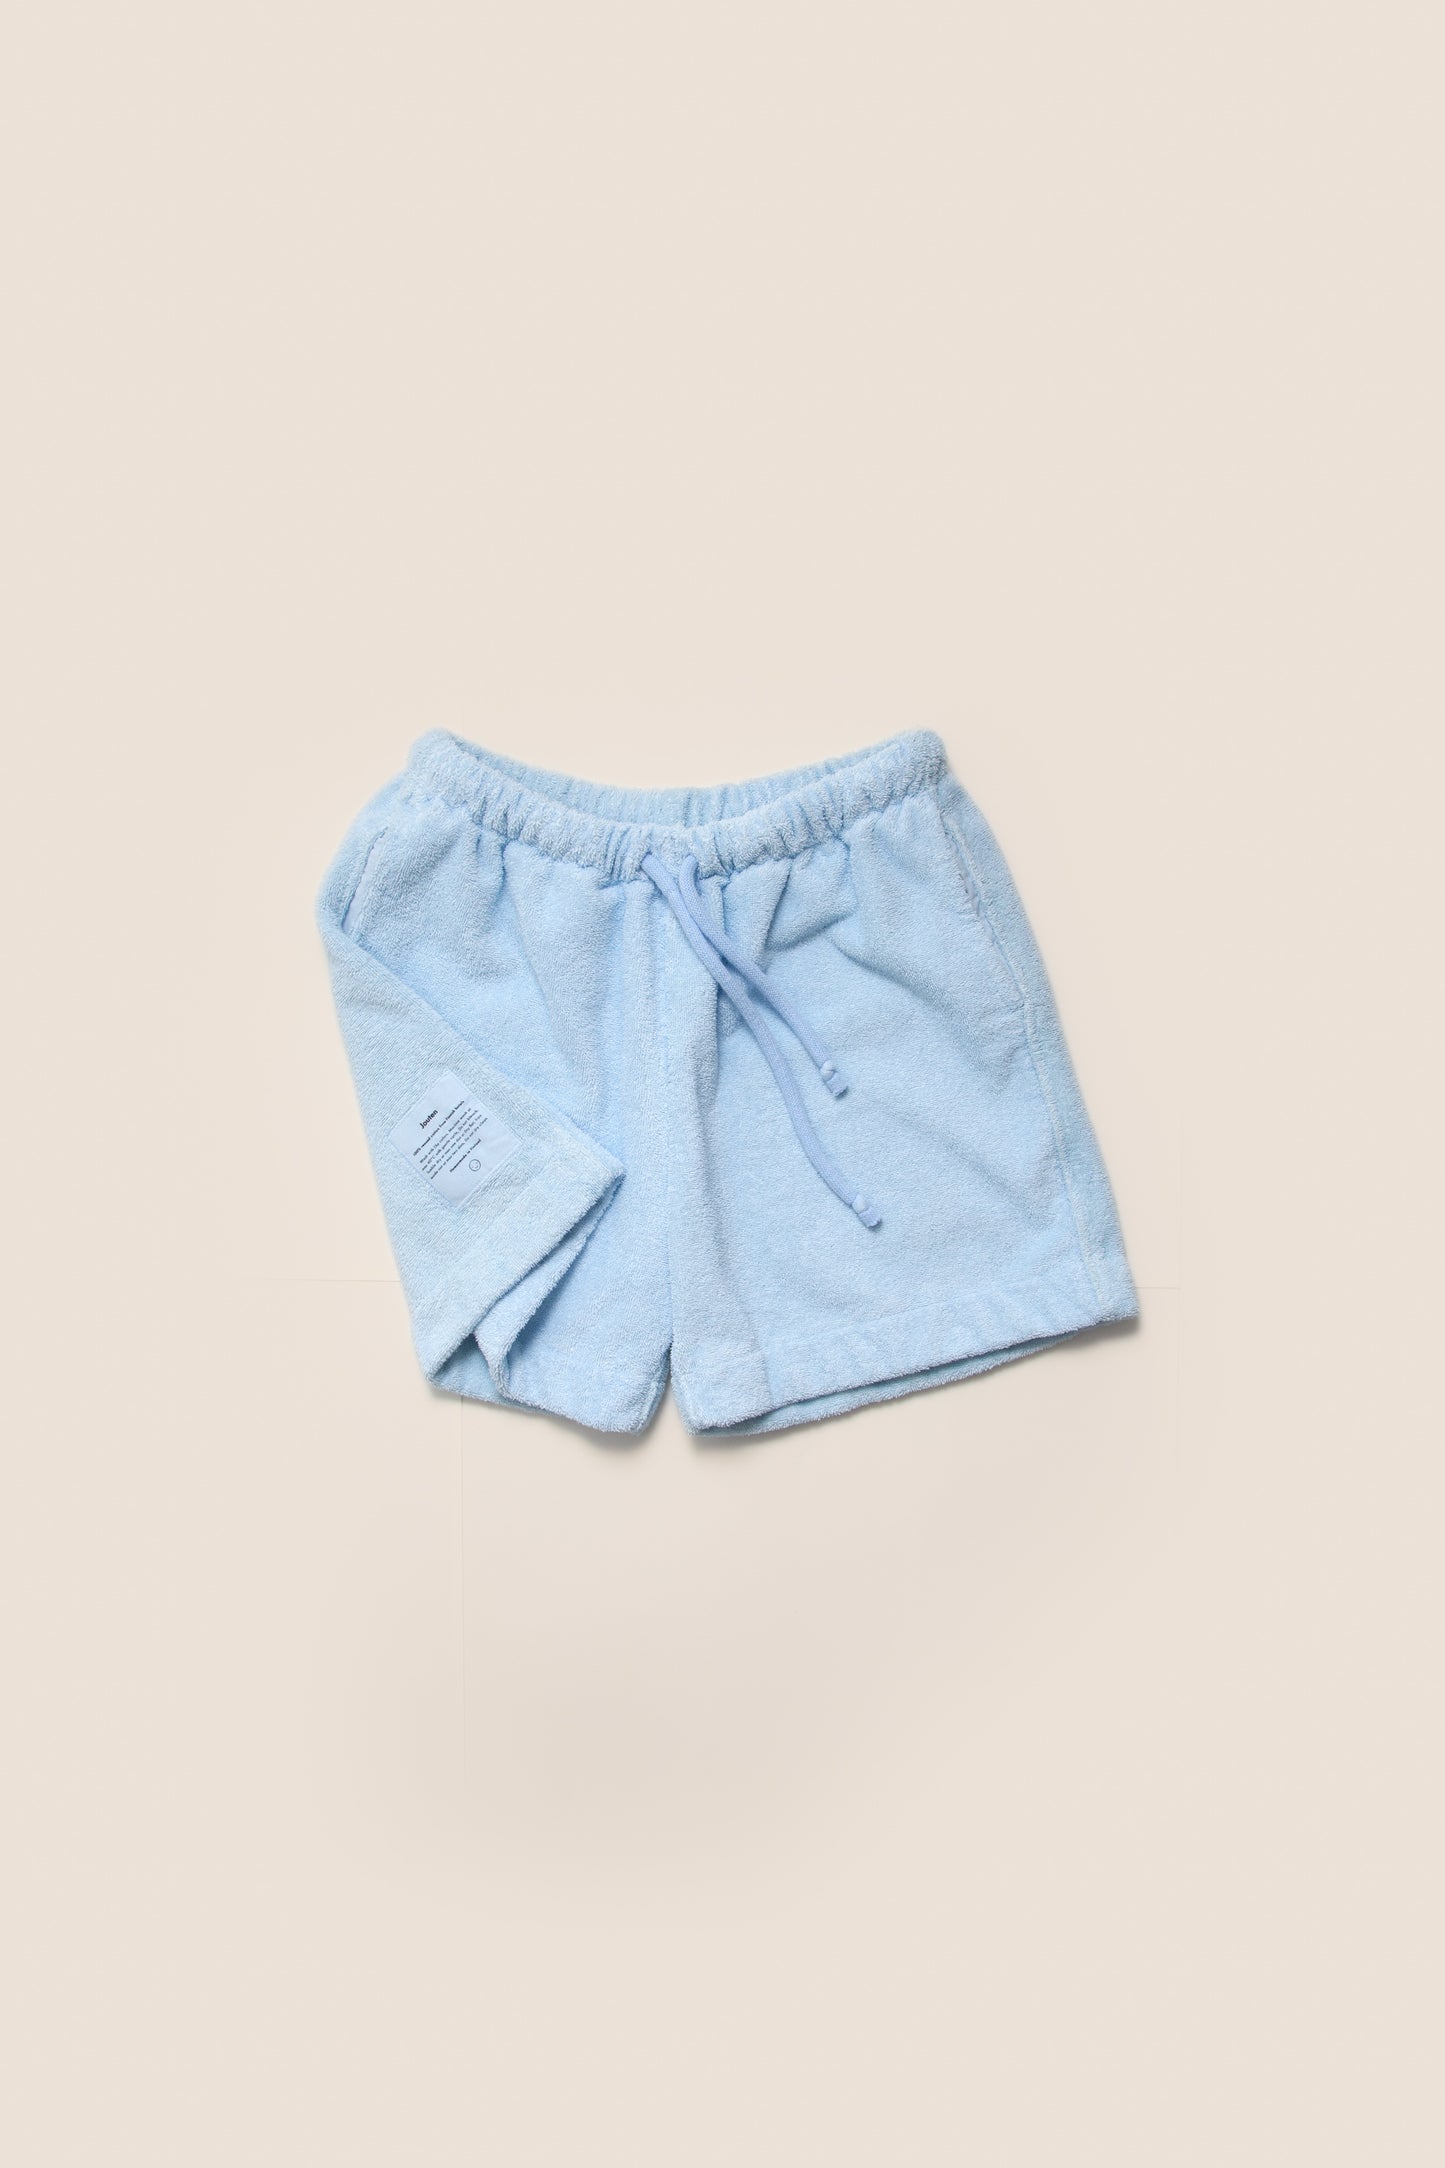 Unisex Terry Minishorts in Cloudy Blue